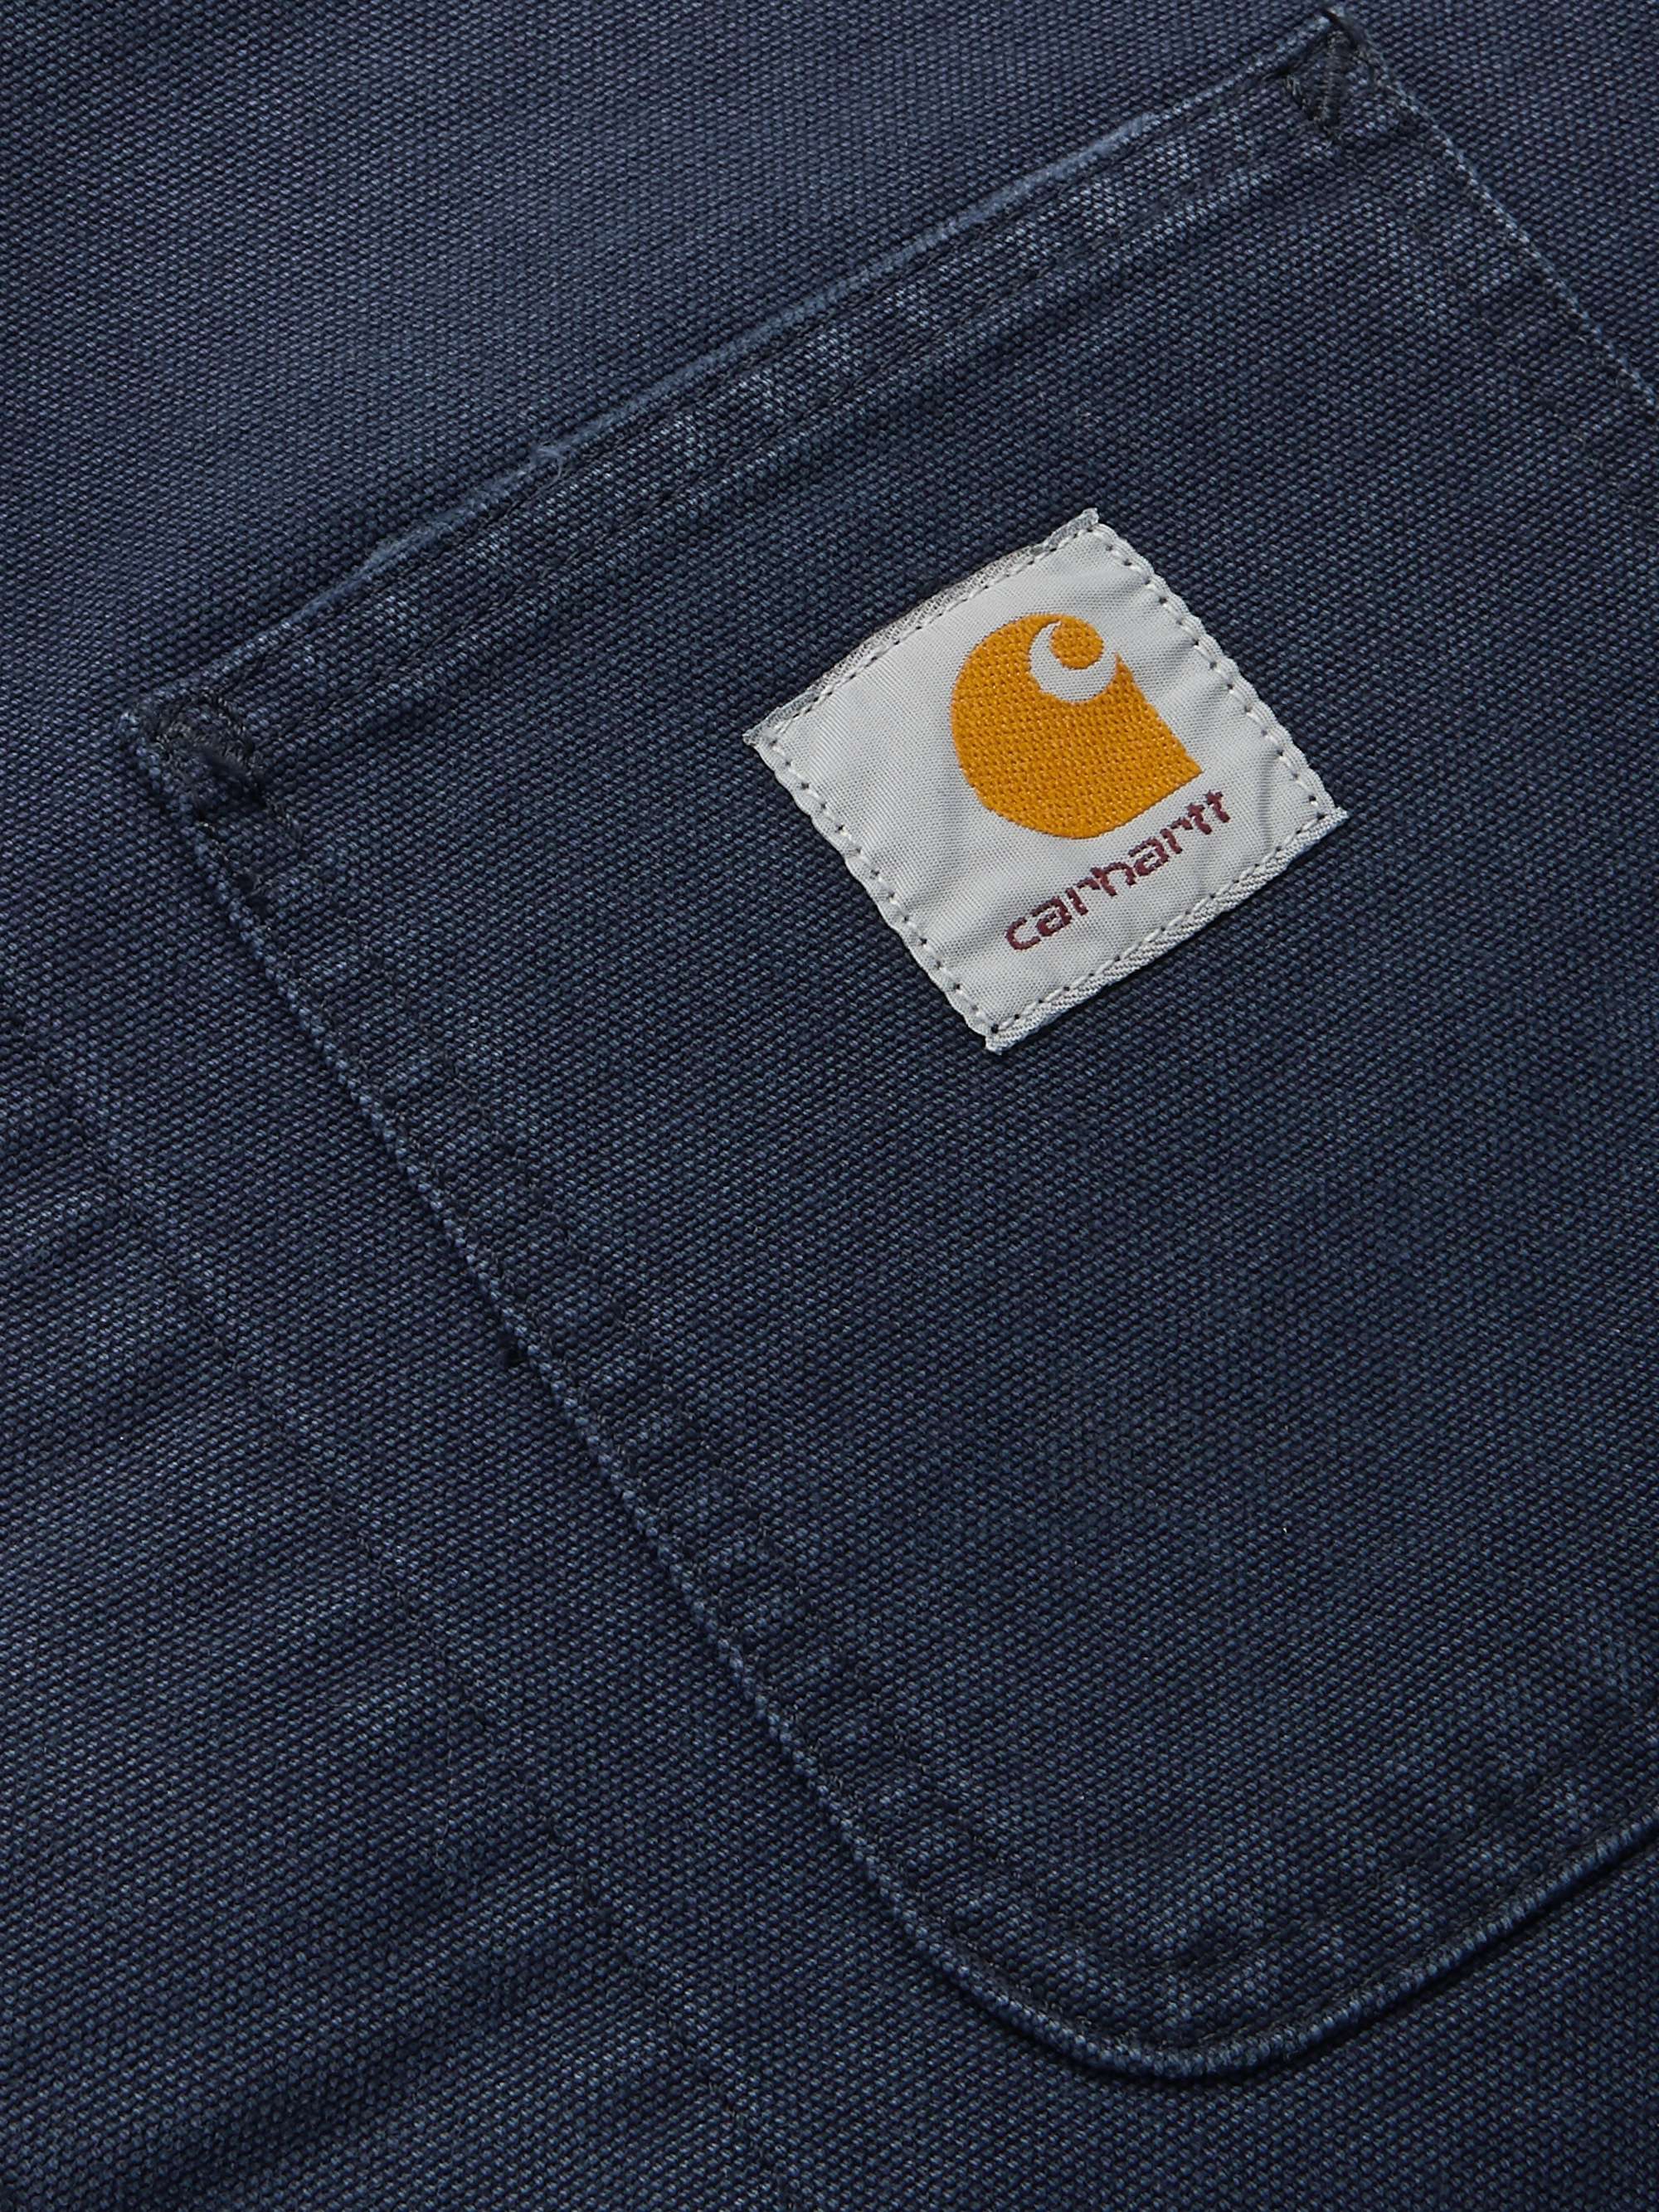 CARHARTT WIP Michigan Corduroy-Trimmed Cotton-Canvas Chore Jacket for ...